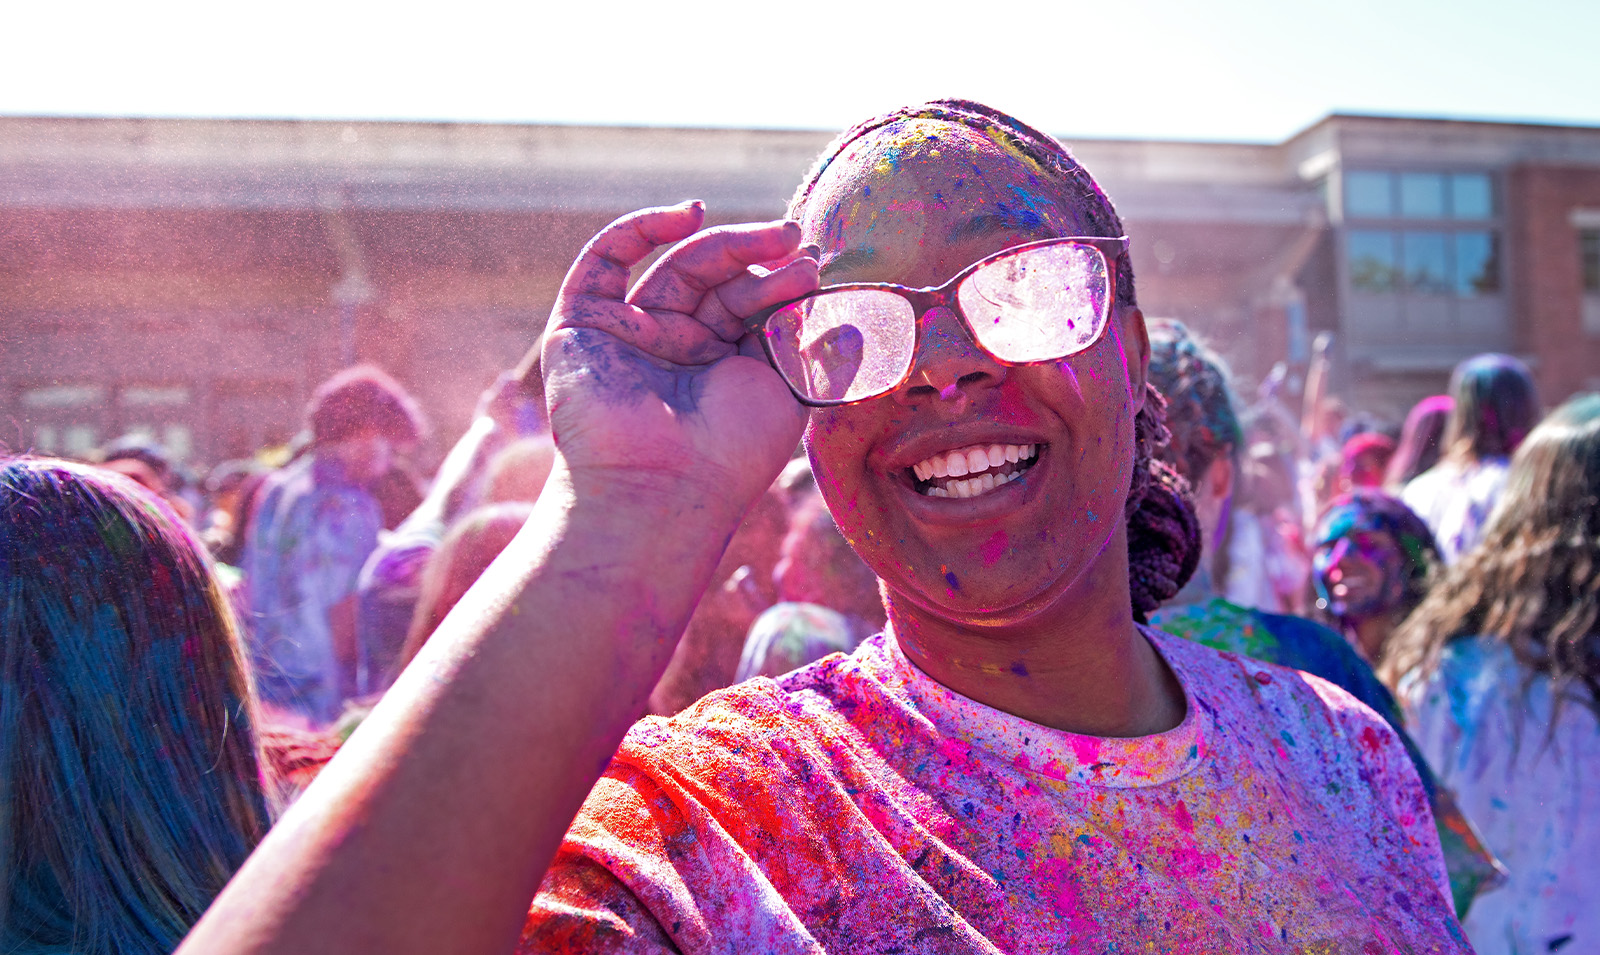 A student covered in paint celebrating Holi and smiling for a photo.